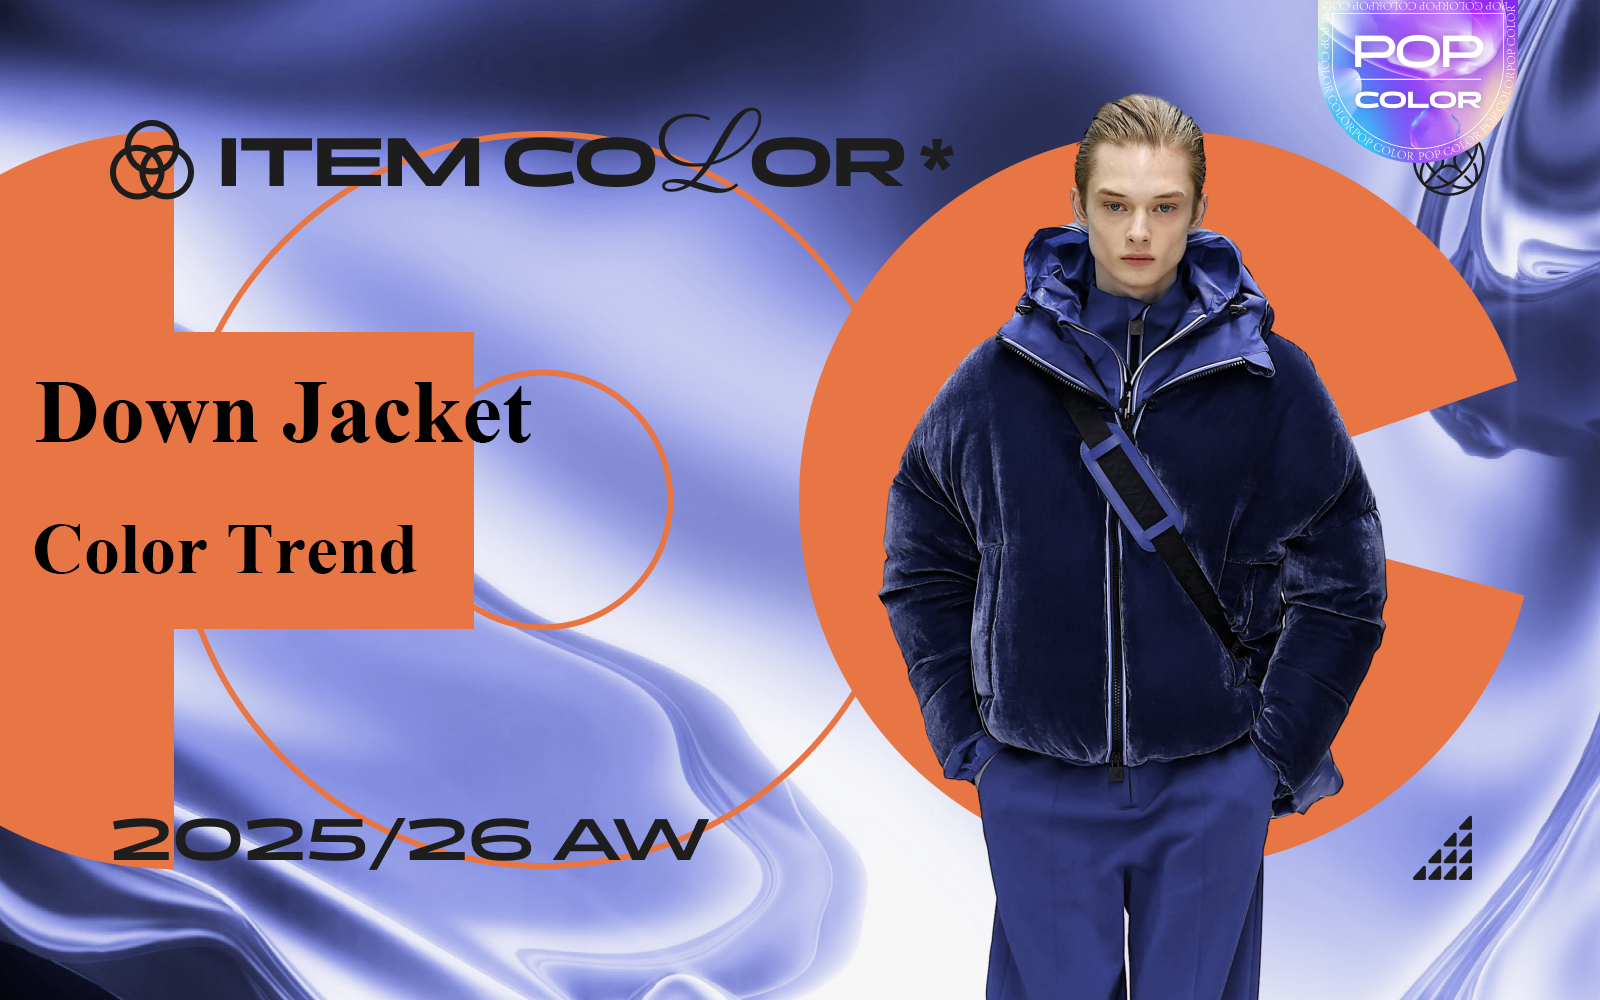 Balanced Transition -- The Color Trend for Men's Down Jacket